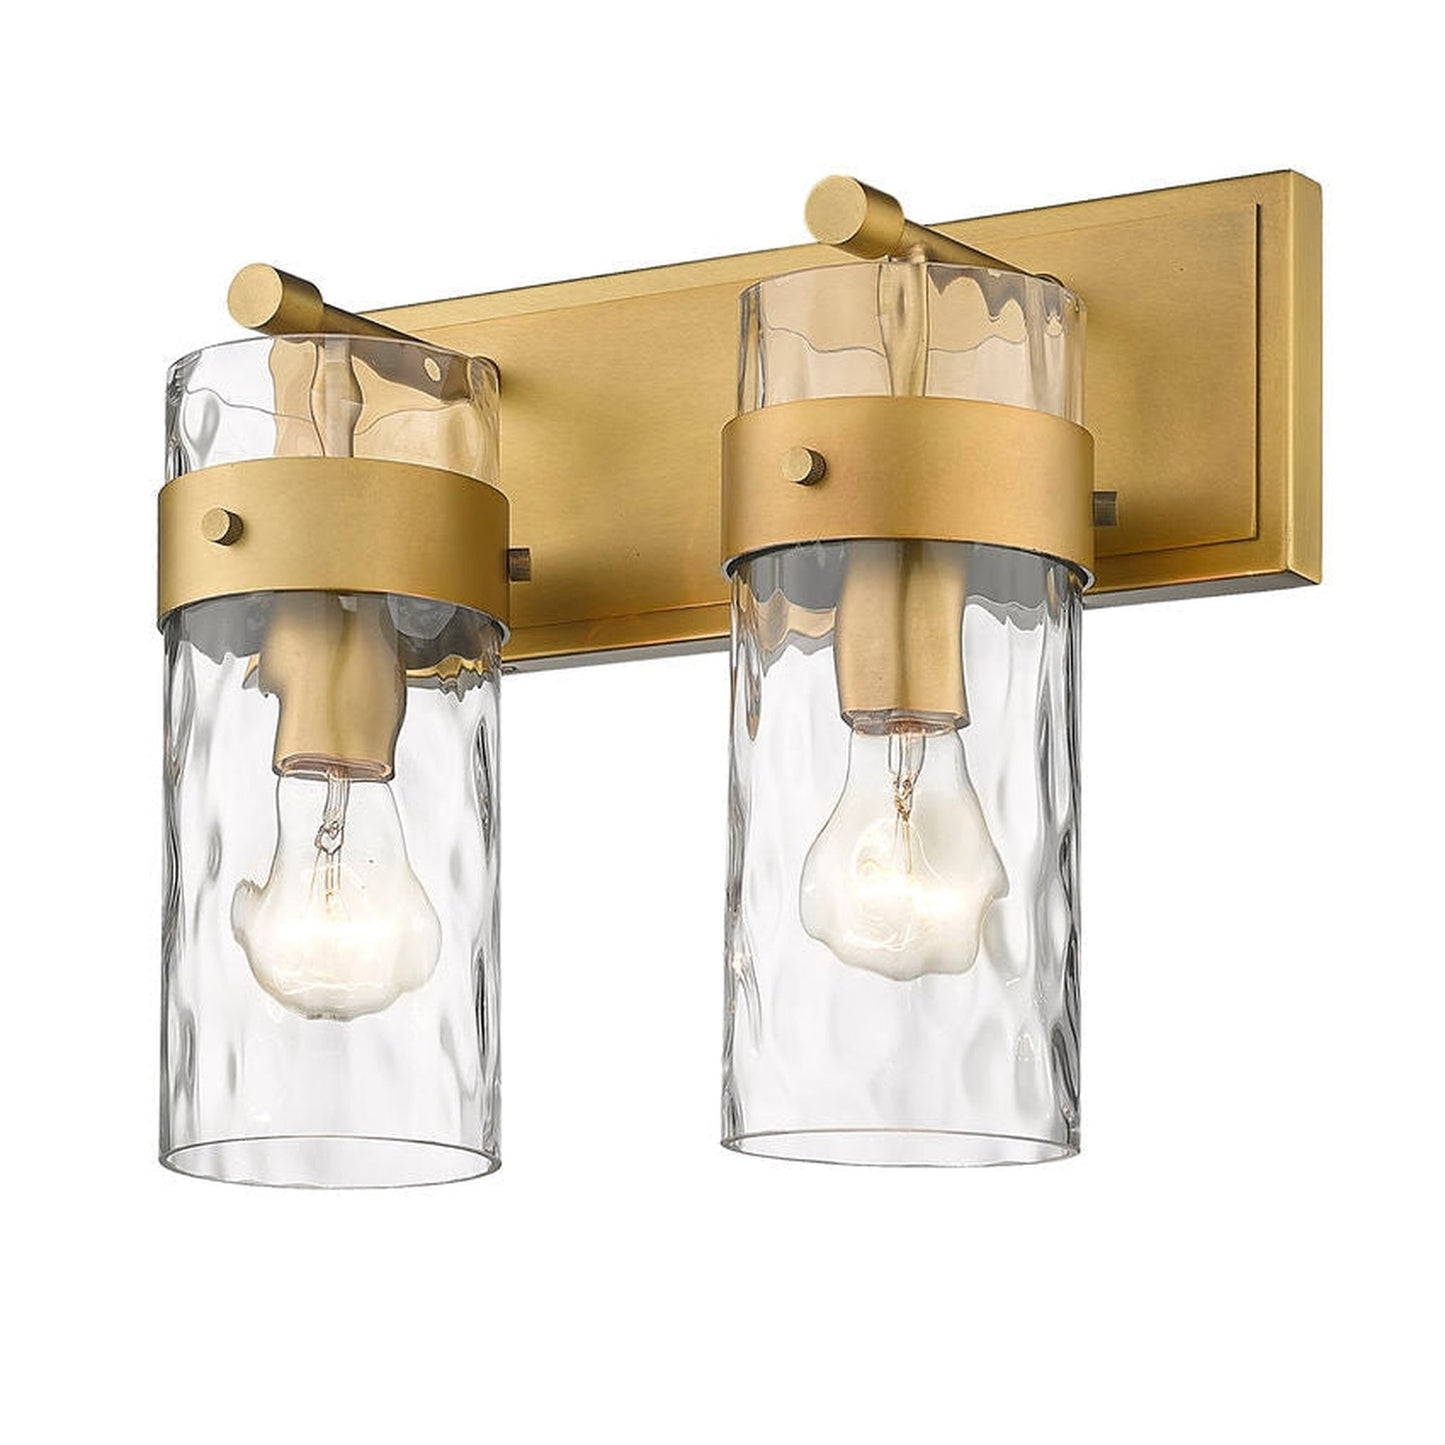 Z-Lite Fontaine 14" 2-Light Rubbed Brass Vanity Light With Clear Glass Shade